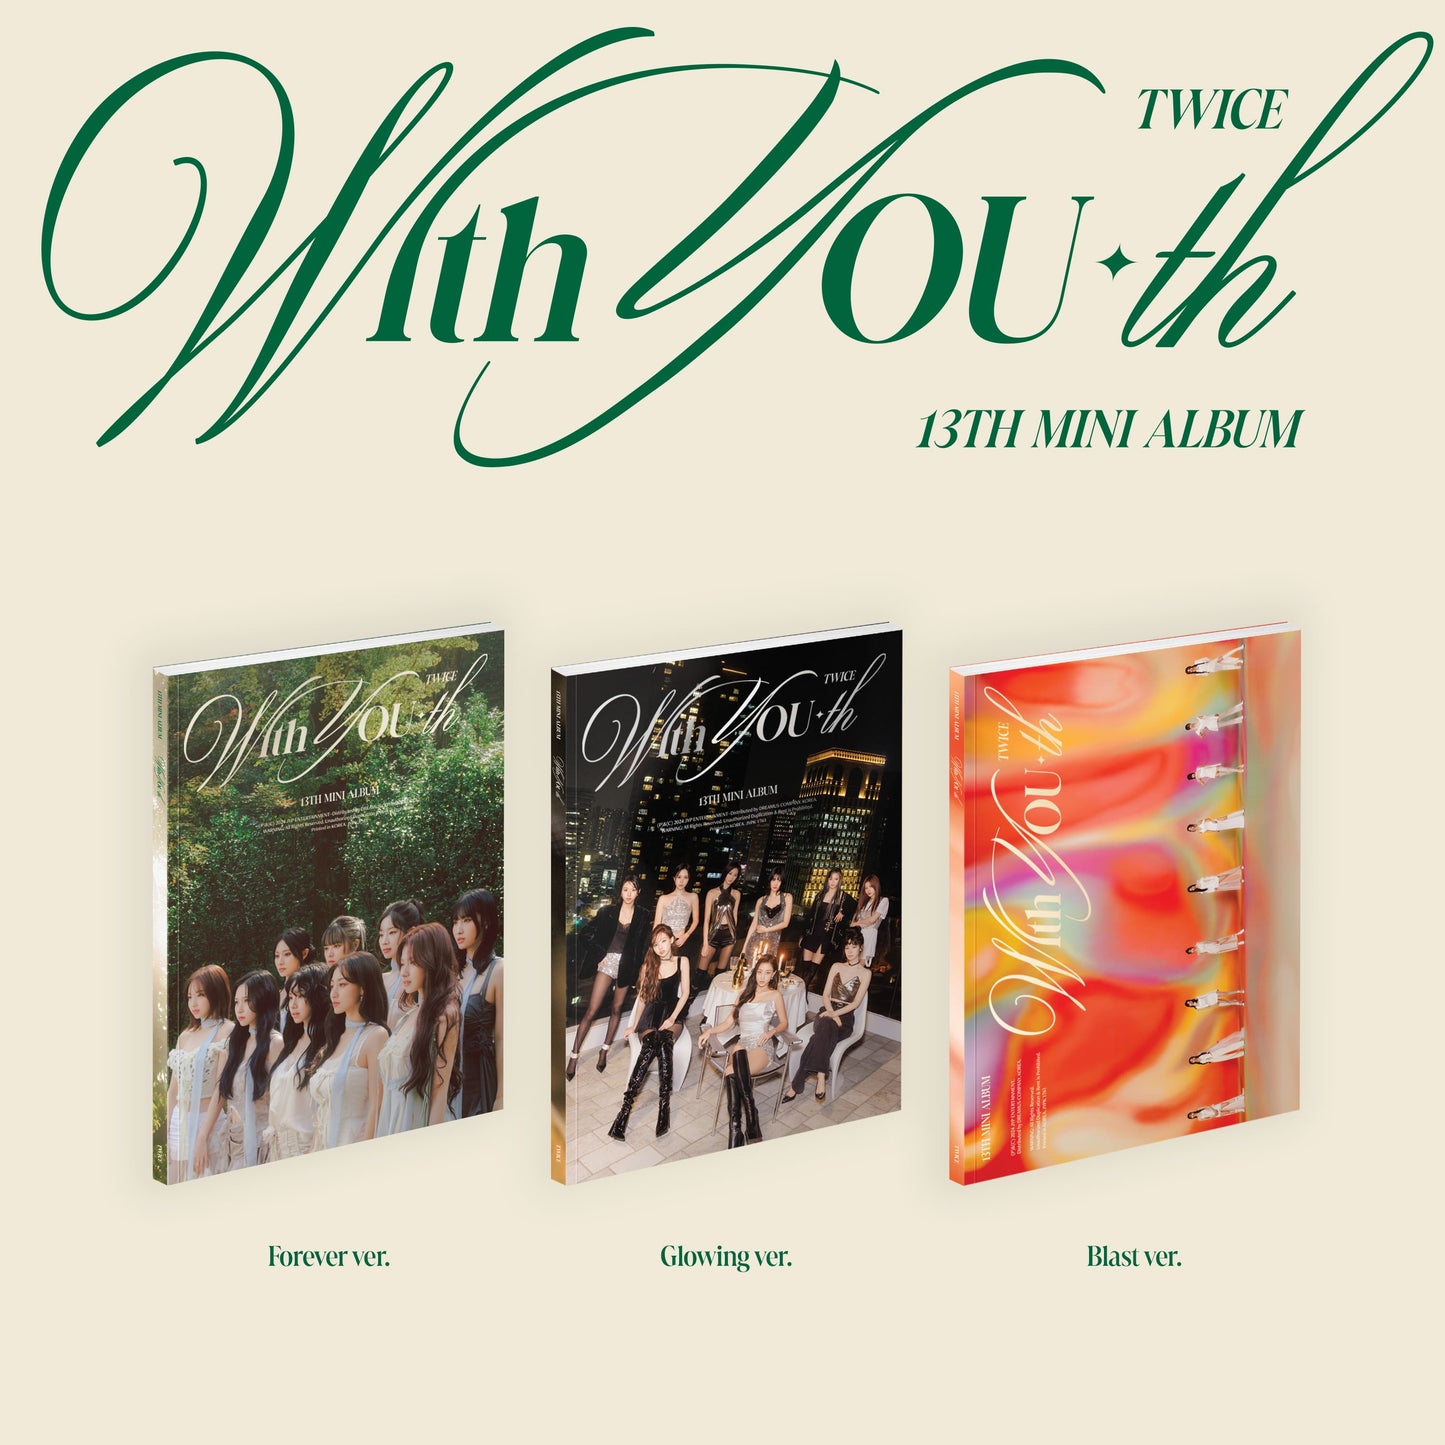 TWICE | With YOU-th (13th Mini Album) | PRE-ORDER | JYPSHOP, WITHMUU, SOUNDWAVE, & YES24 POBS AVAILABLE!